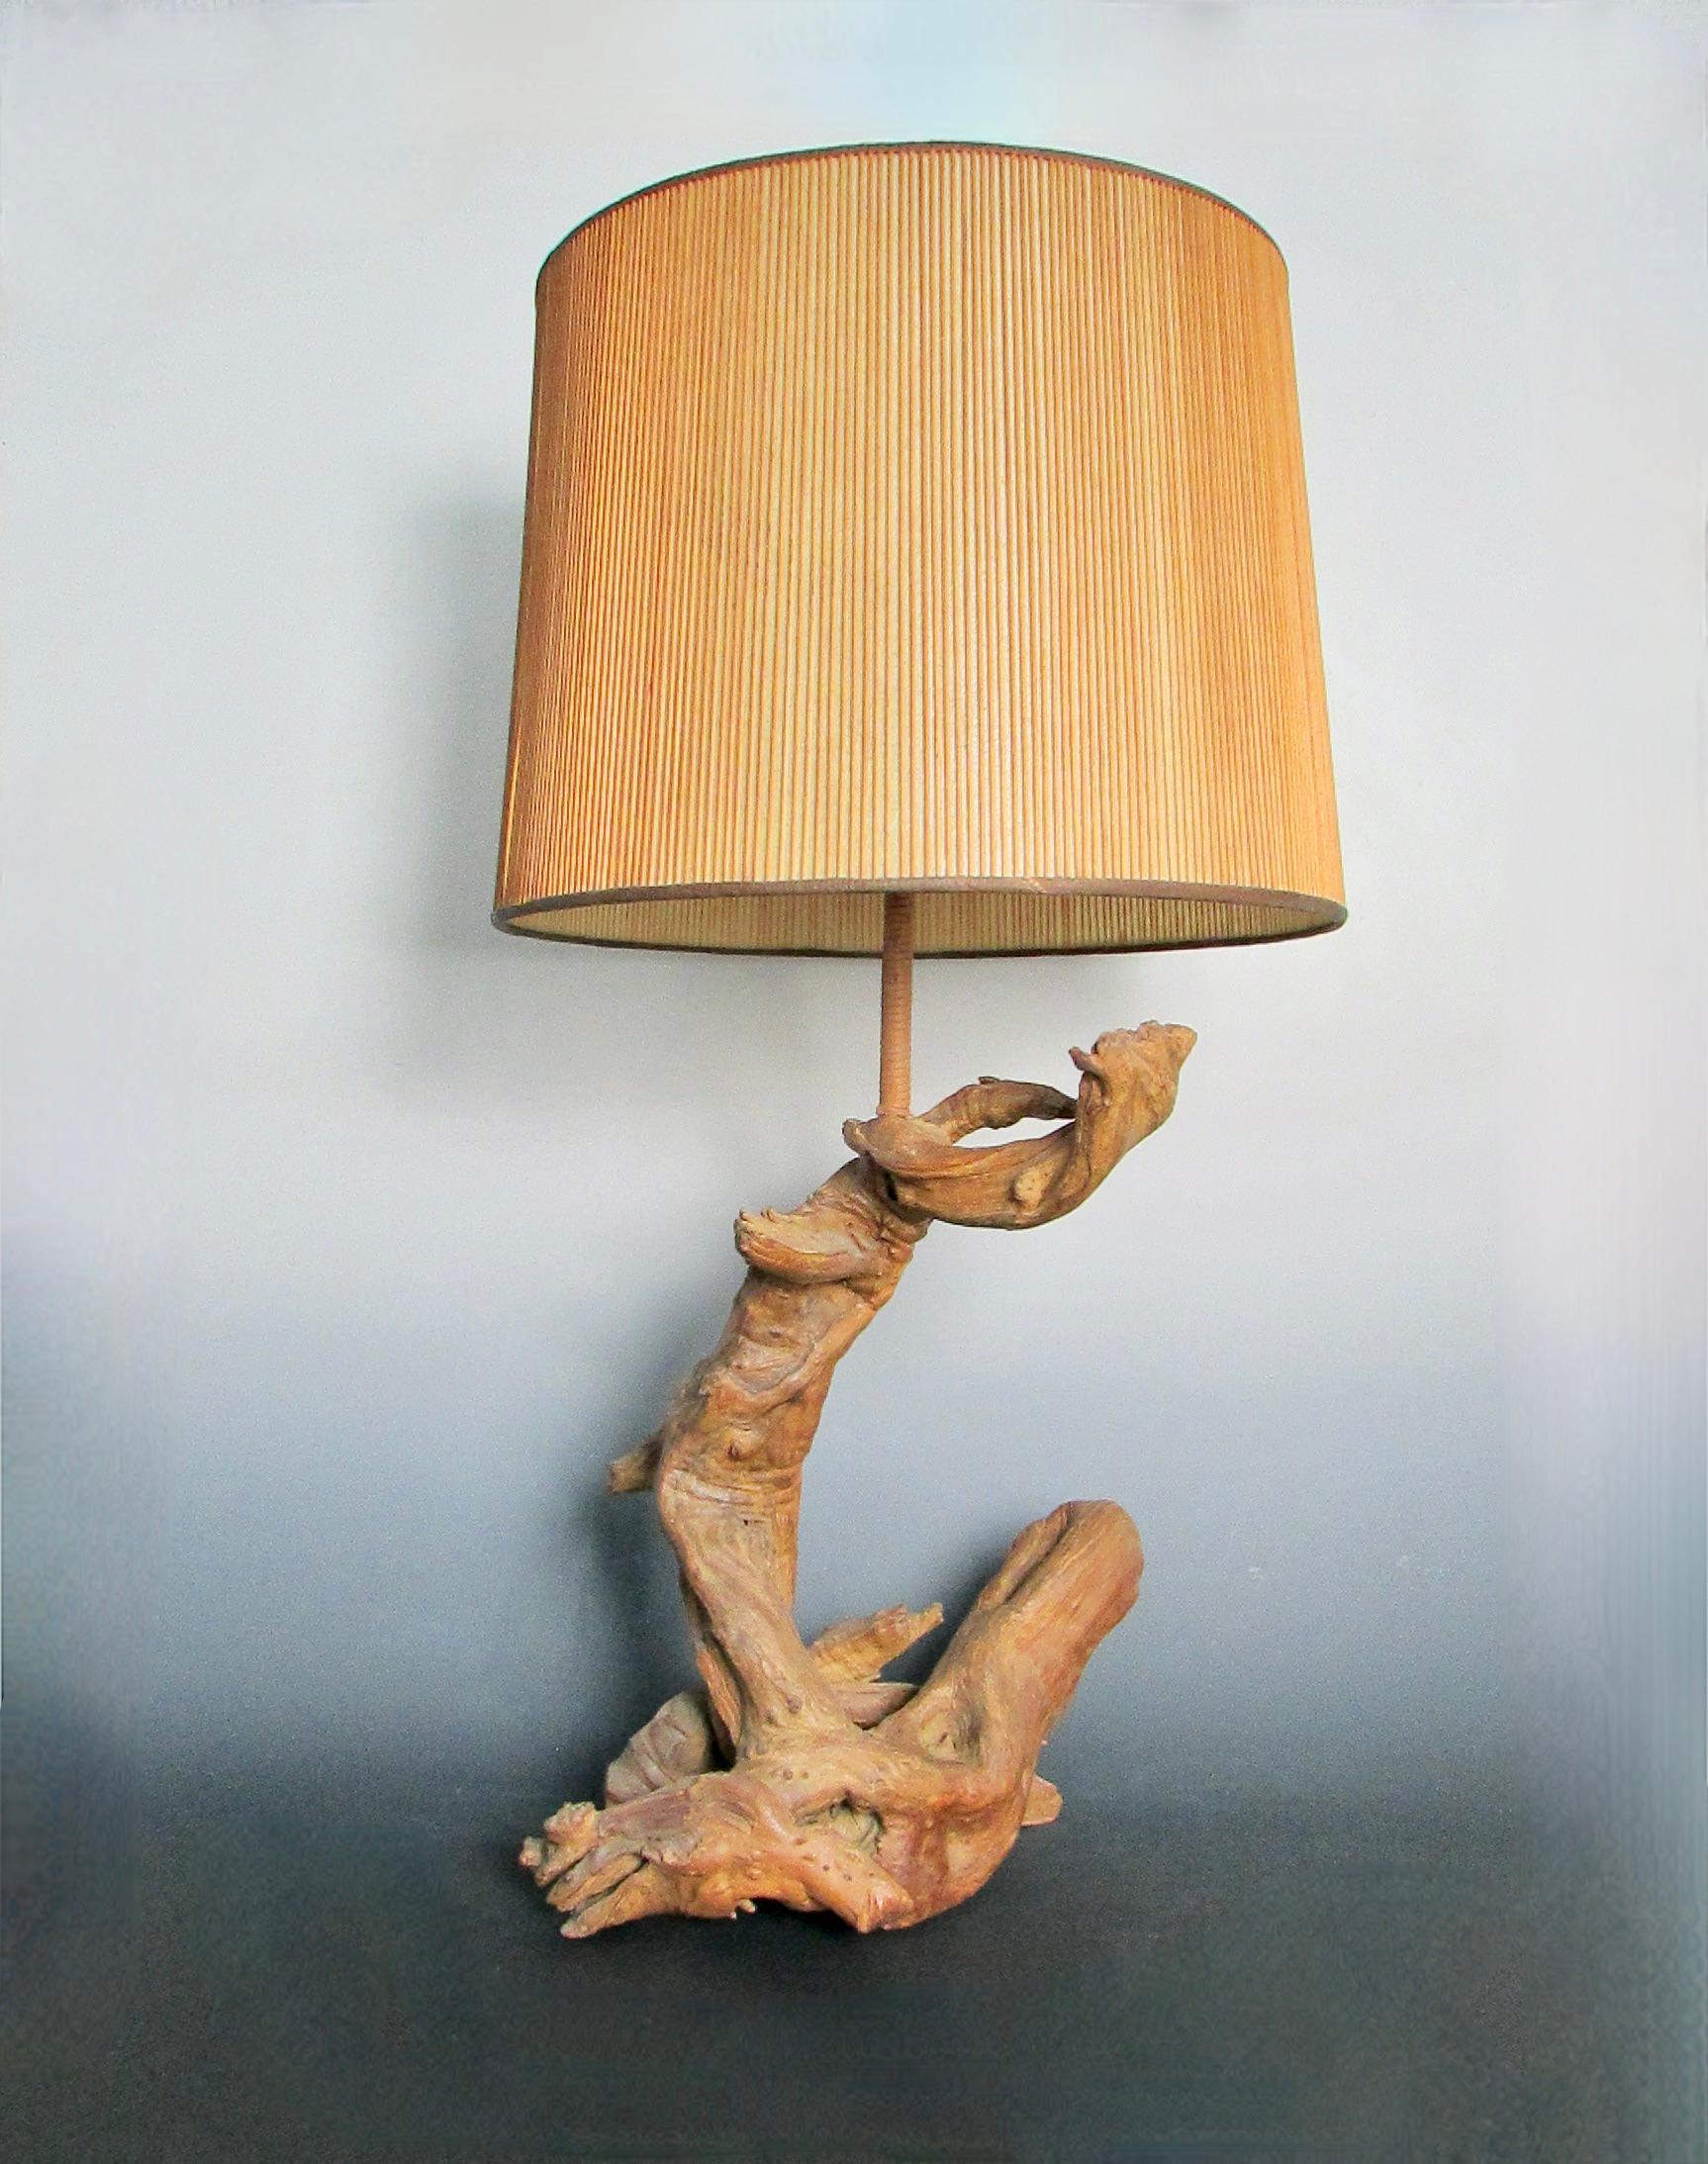 Hand-Crafted Organic Natural Free Edge Style Hardwood Table Lamp with Original Shade For Sale